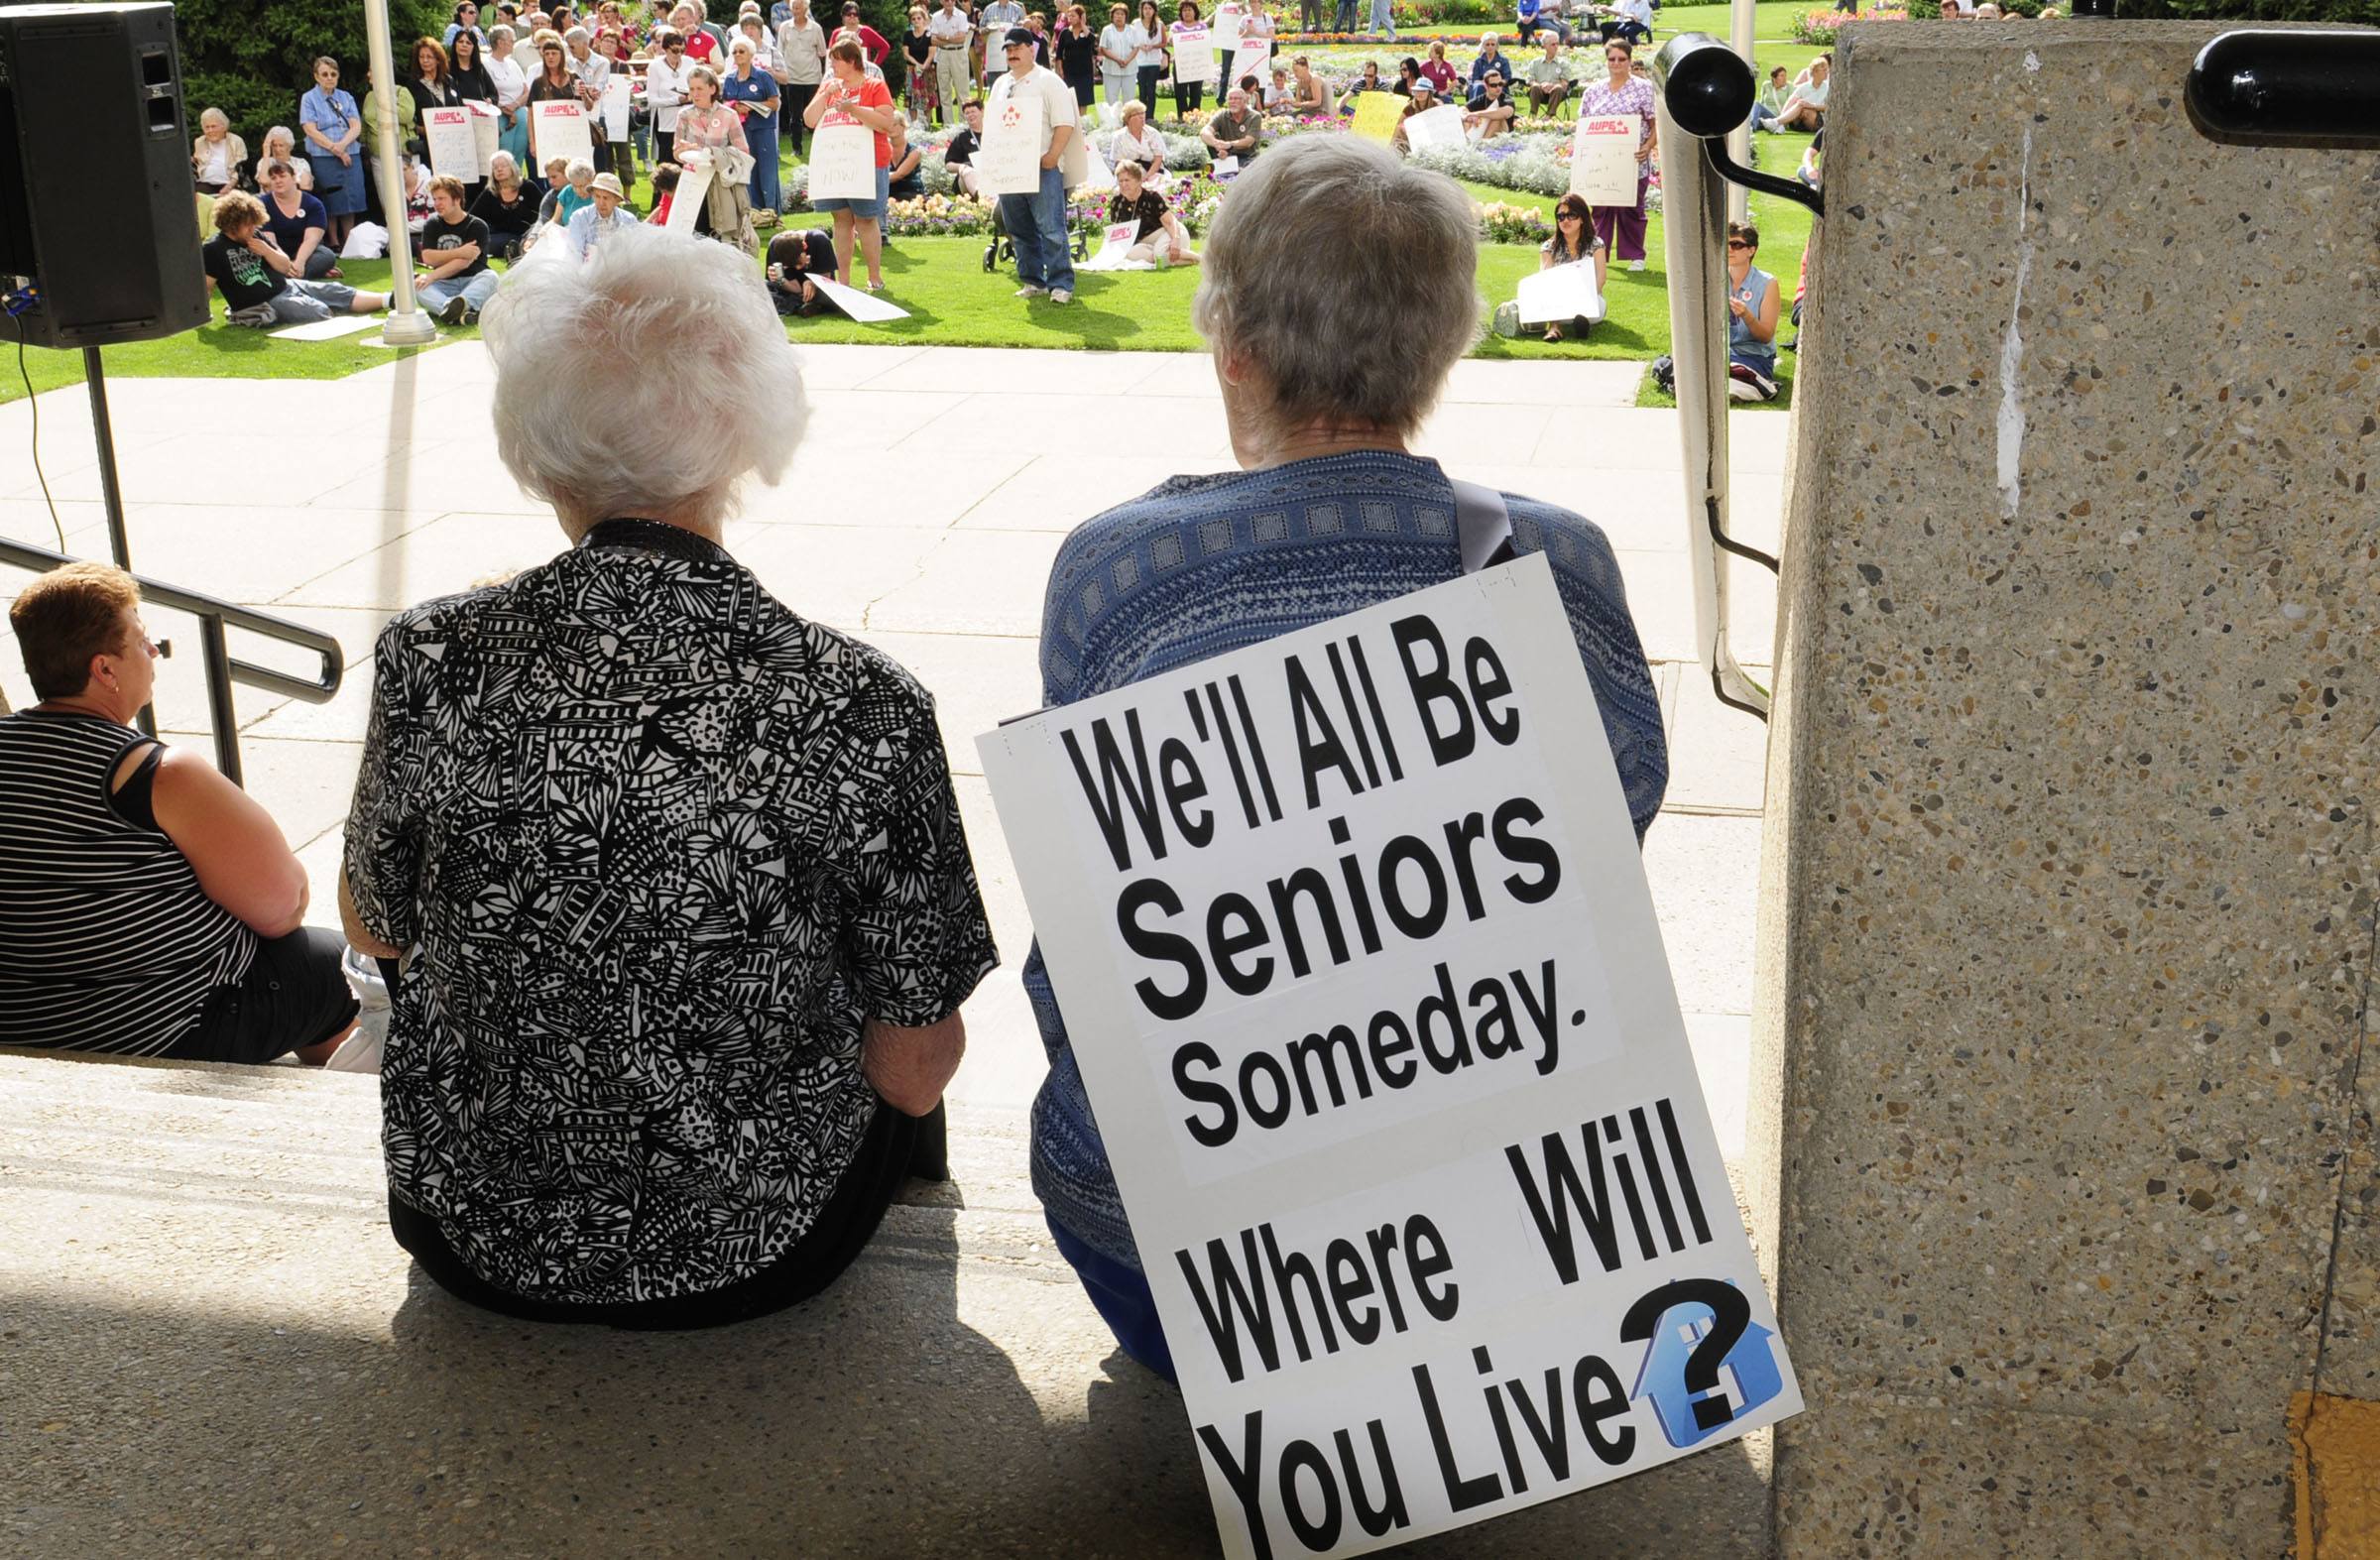 About 300 people gathered at City Hall Park Tuesday to try and change the provincial government's plan to close two City nursing homes.